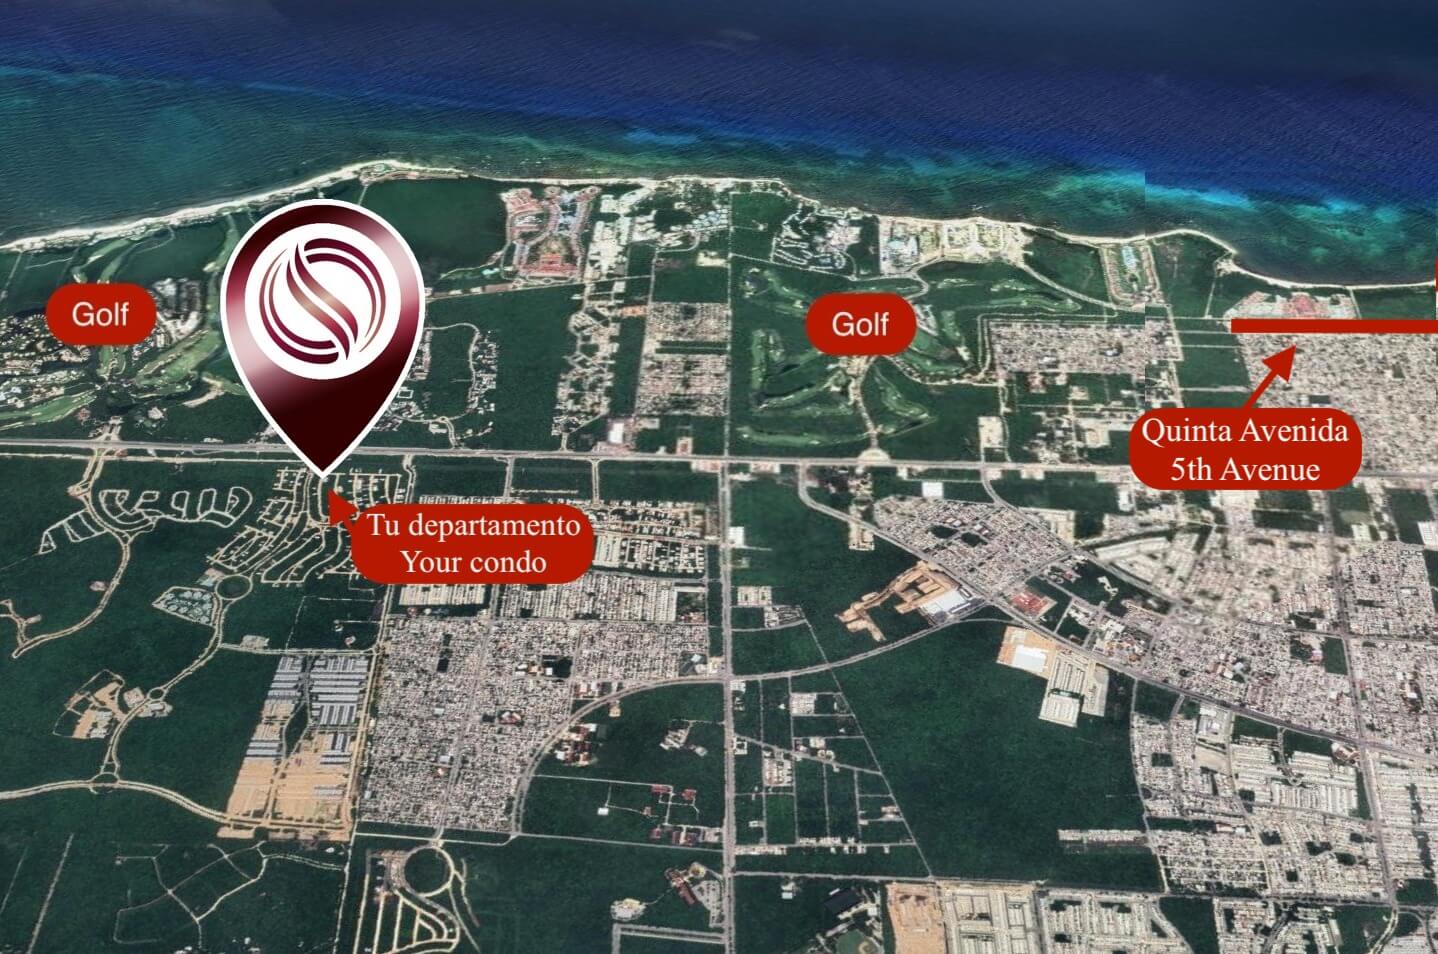 Double height apartment, luxury finishes, with beach club, golf course, more than 20 amenities, for sale, Corasol, Playa del Carmen, pre-con